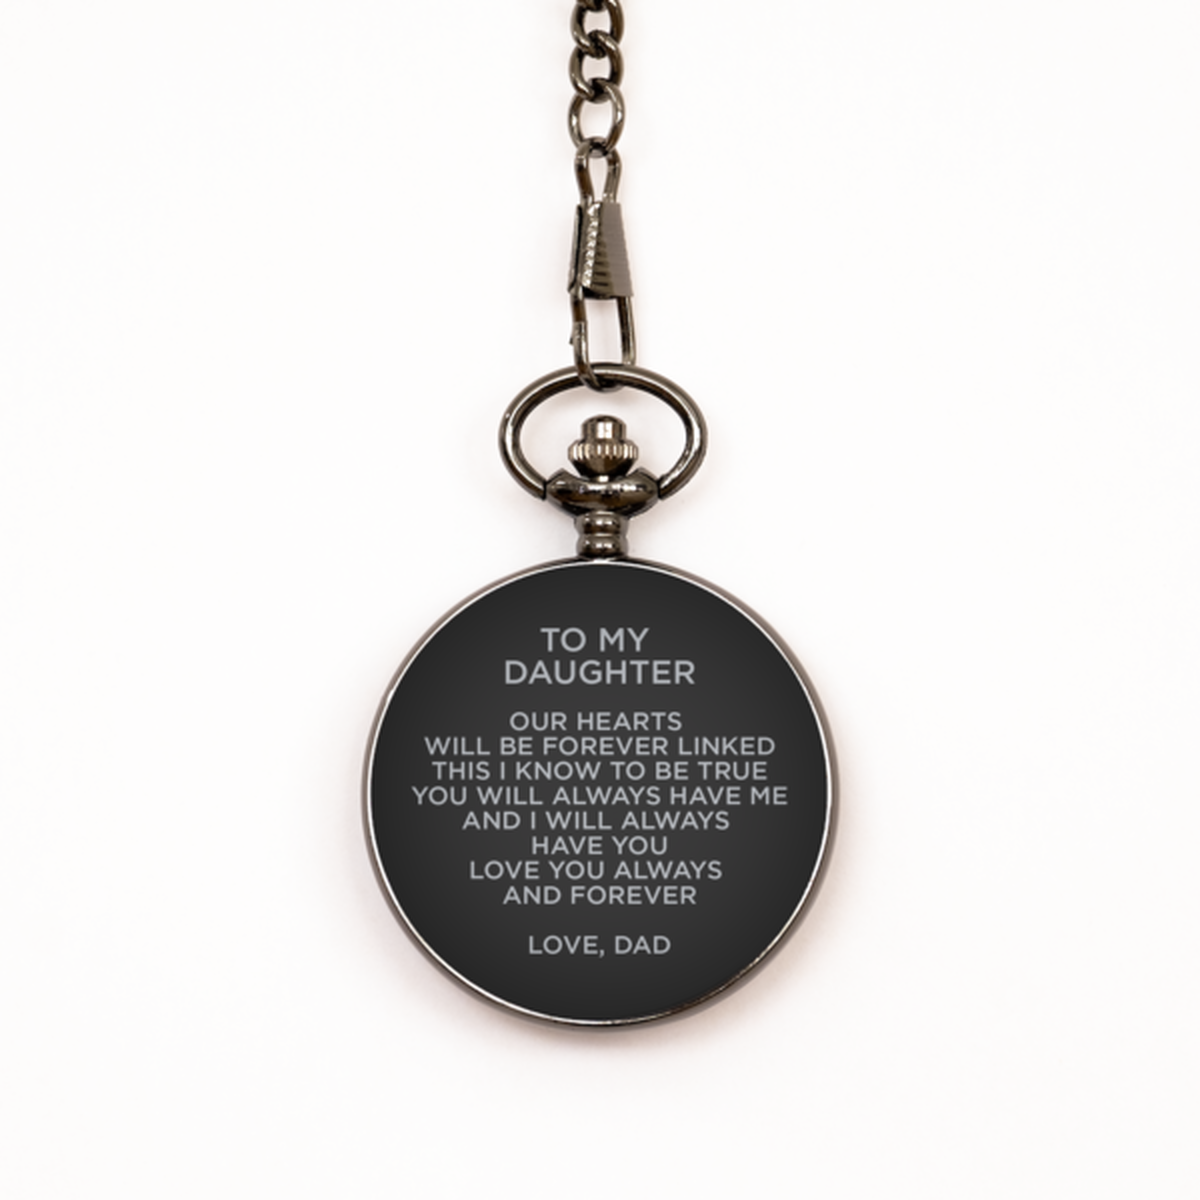 To My Daughter Black Pocket Watch, Always And Forever, Birthday Gifts For Daughter From Dad, Christmas Gifts For Women